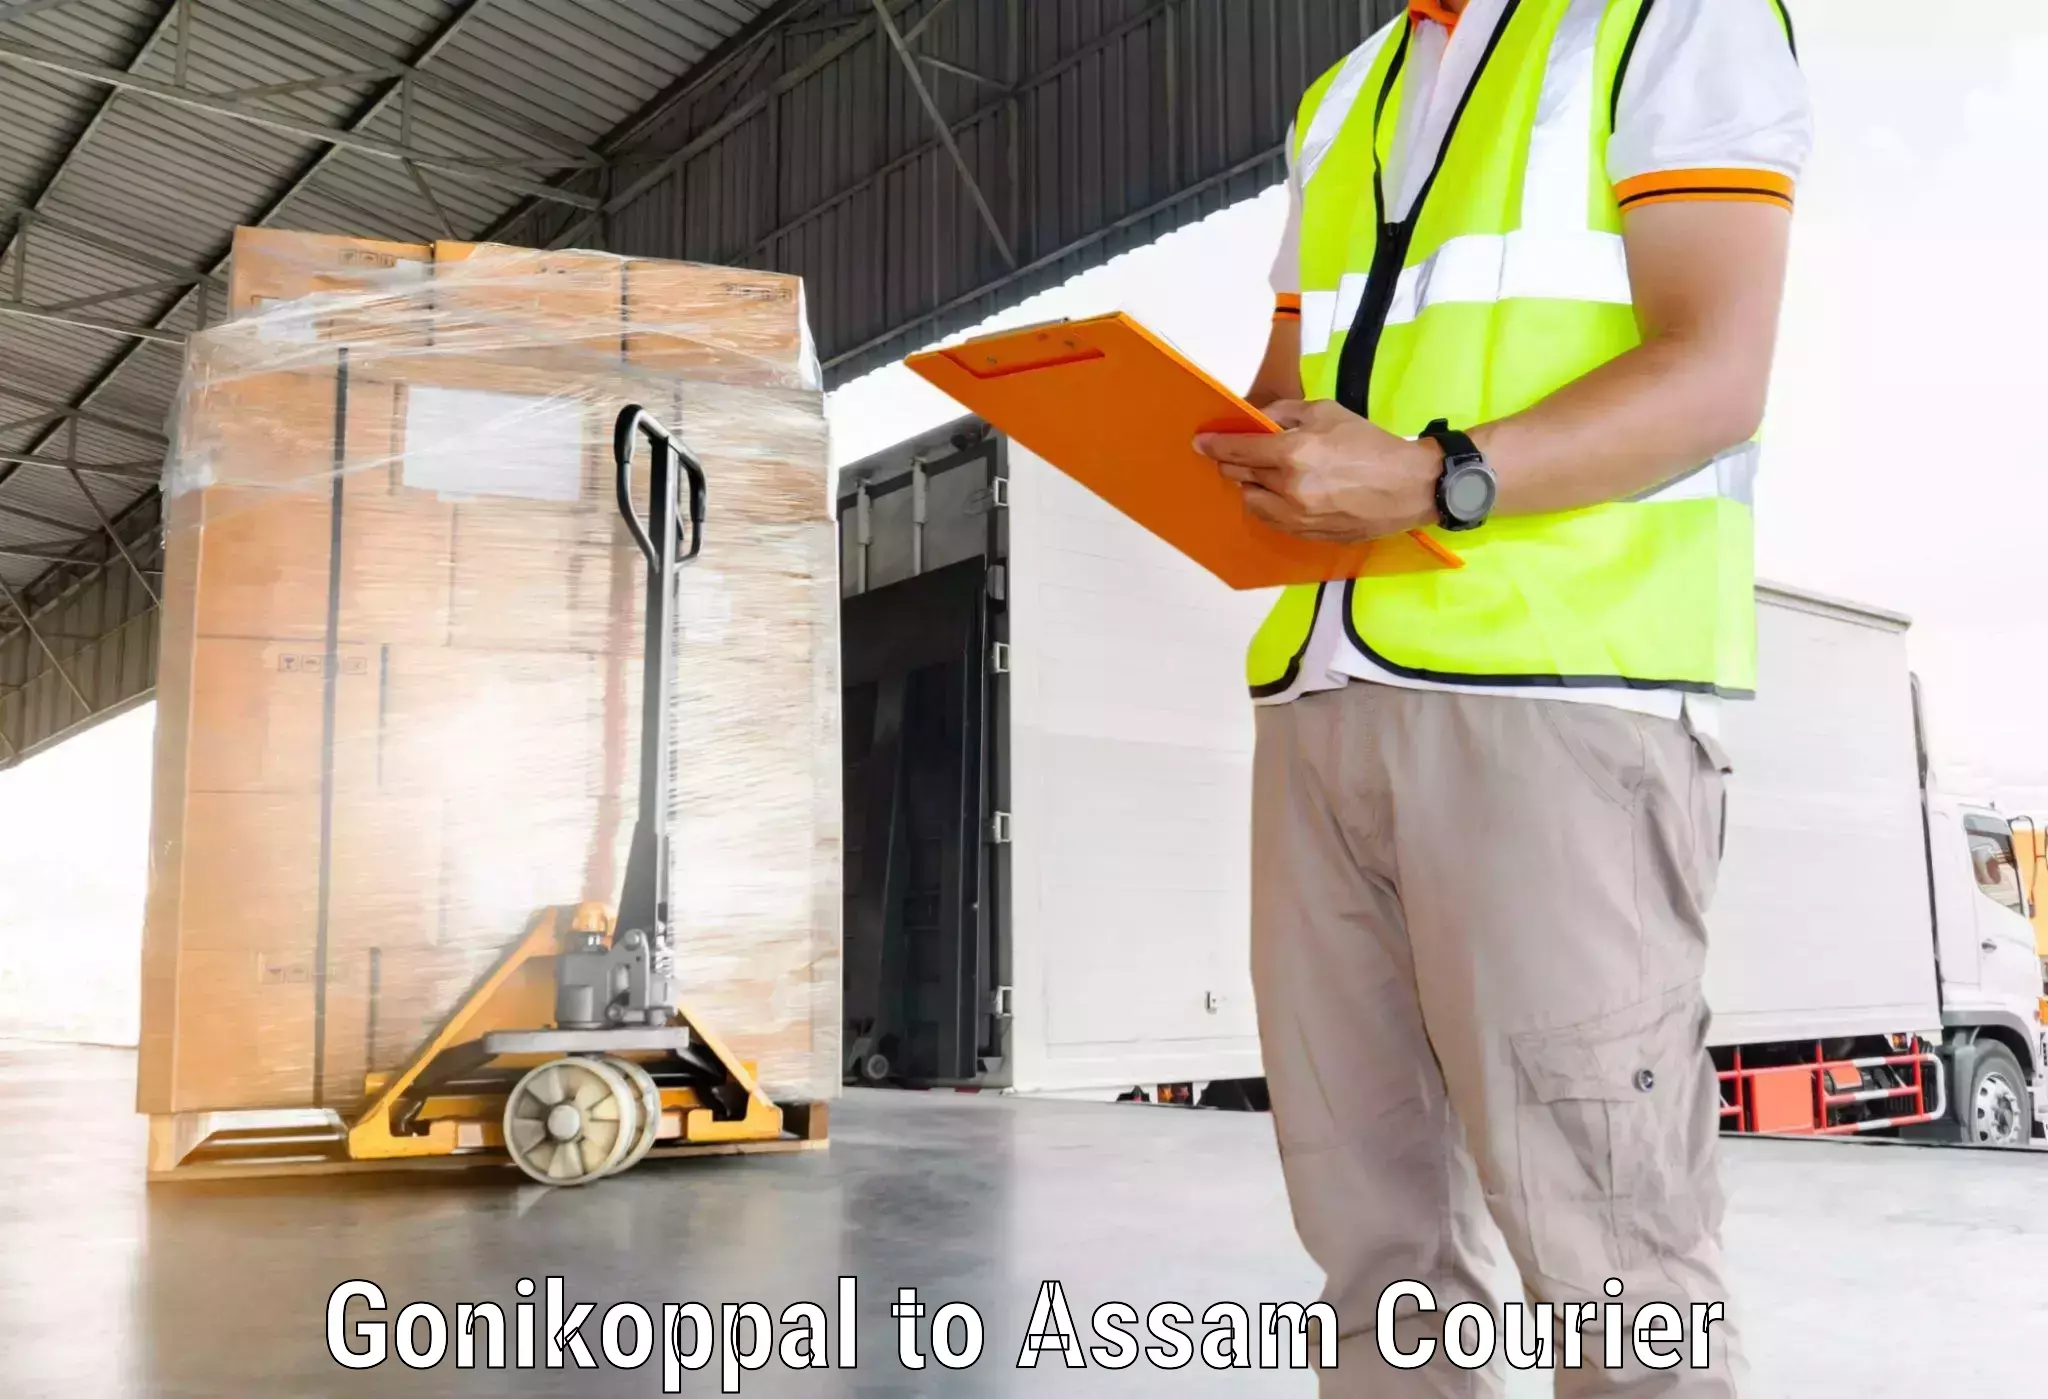 Same-day delivery solutions Gonikoppal to Lala Assam